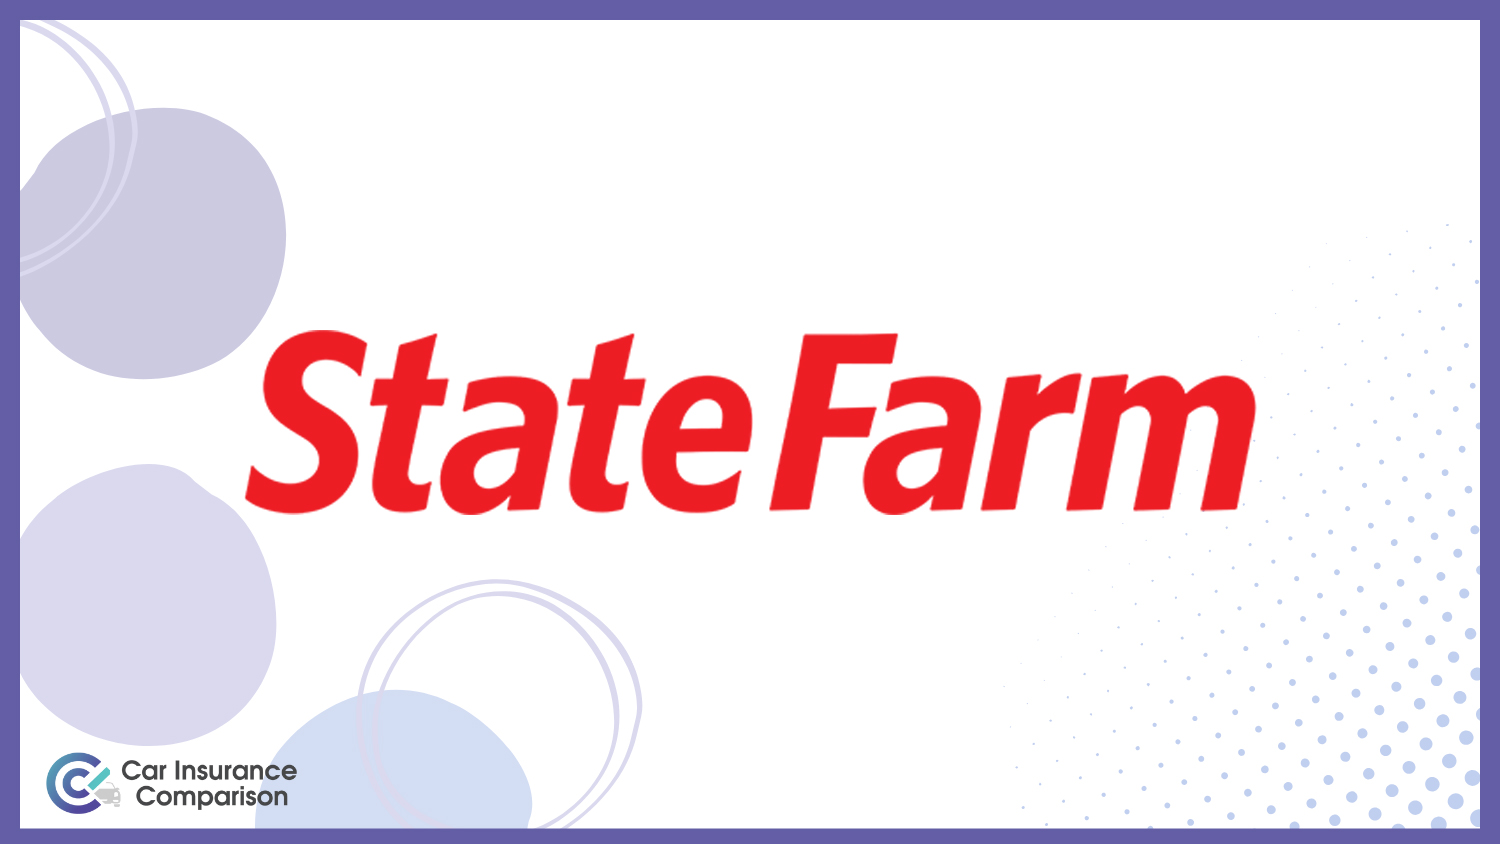 State Farm: Compare Teen Driver Car Insurance Rates